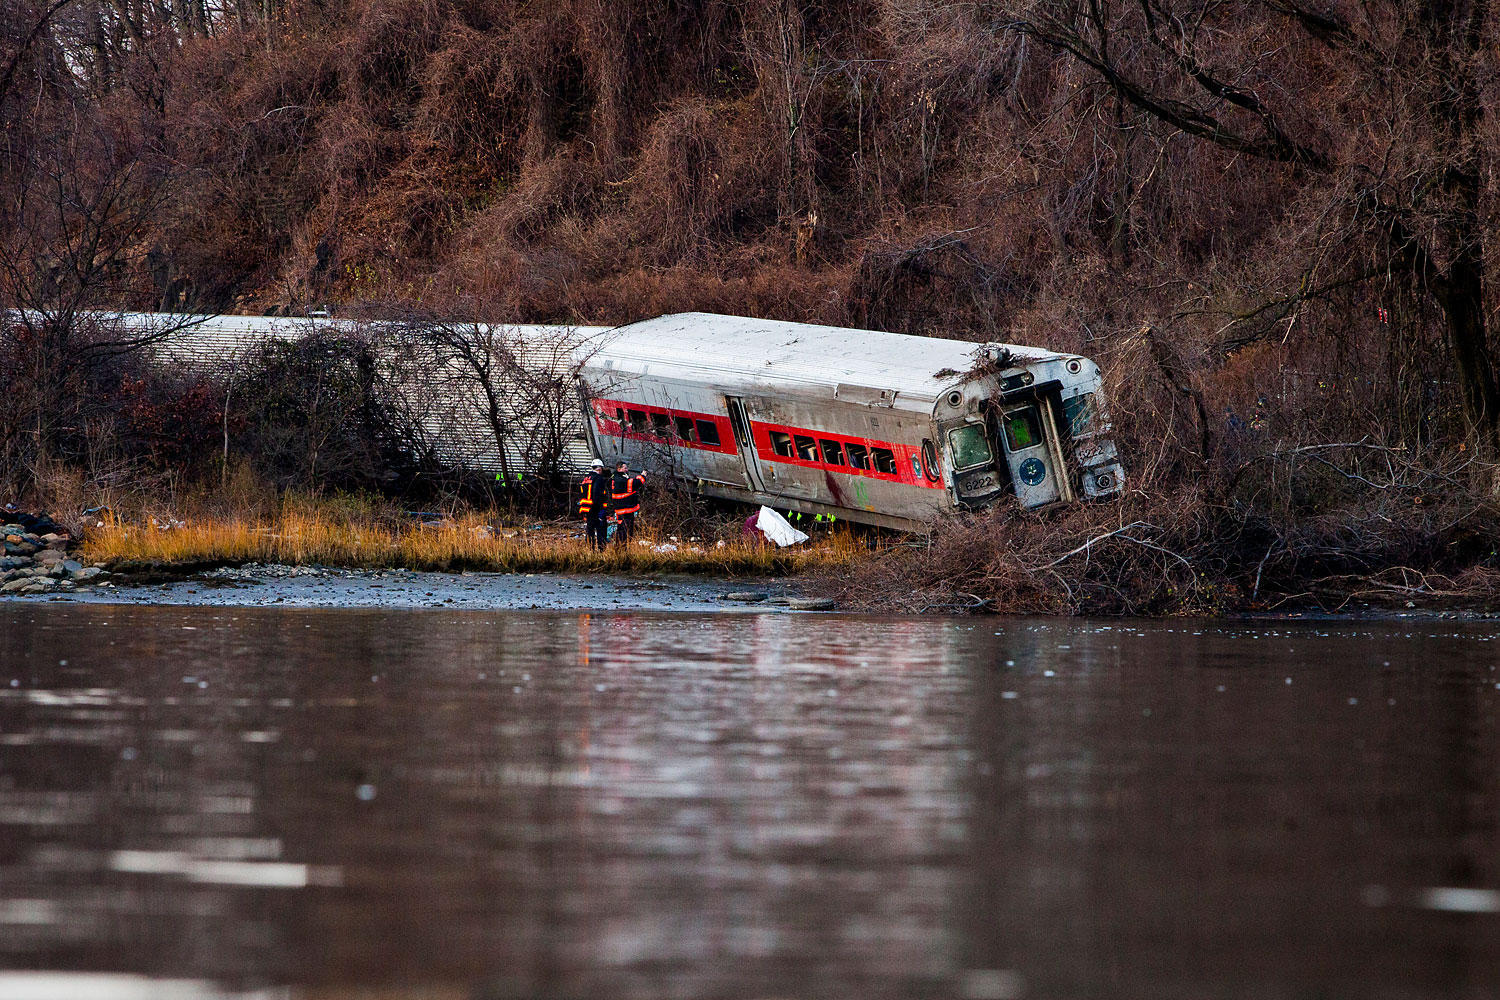 The wreckage of a Metro-North commuter train lies on its side after it derailed just north of the Spuyten Duyvil station December 1, 2013 in the Bronx borough of New York City. (Christopher Gregory&mdash;Getty Images)